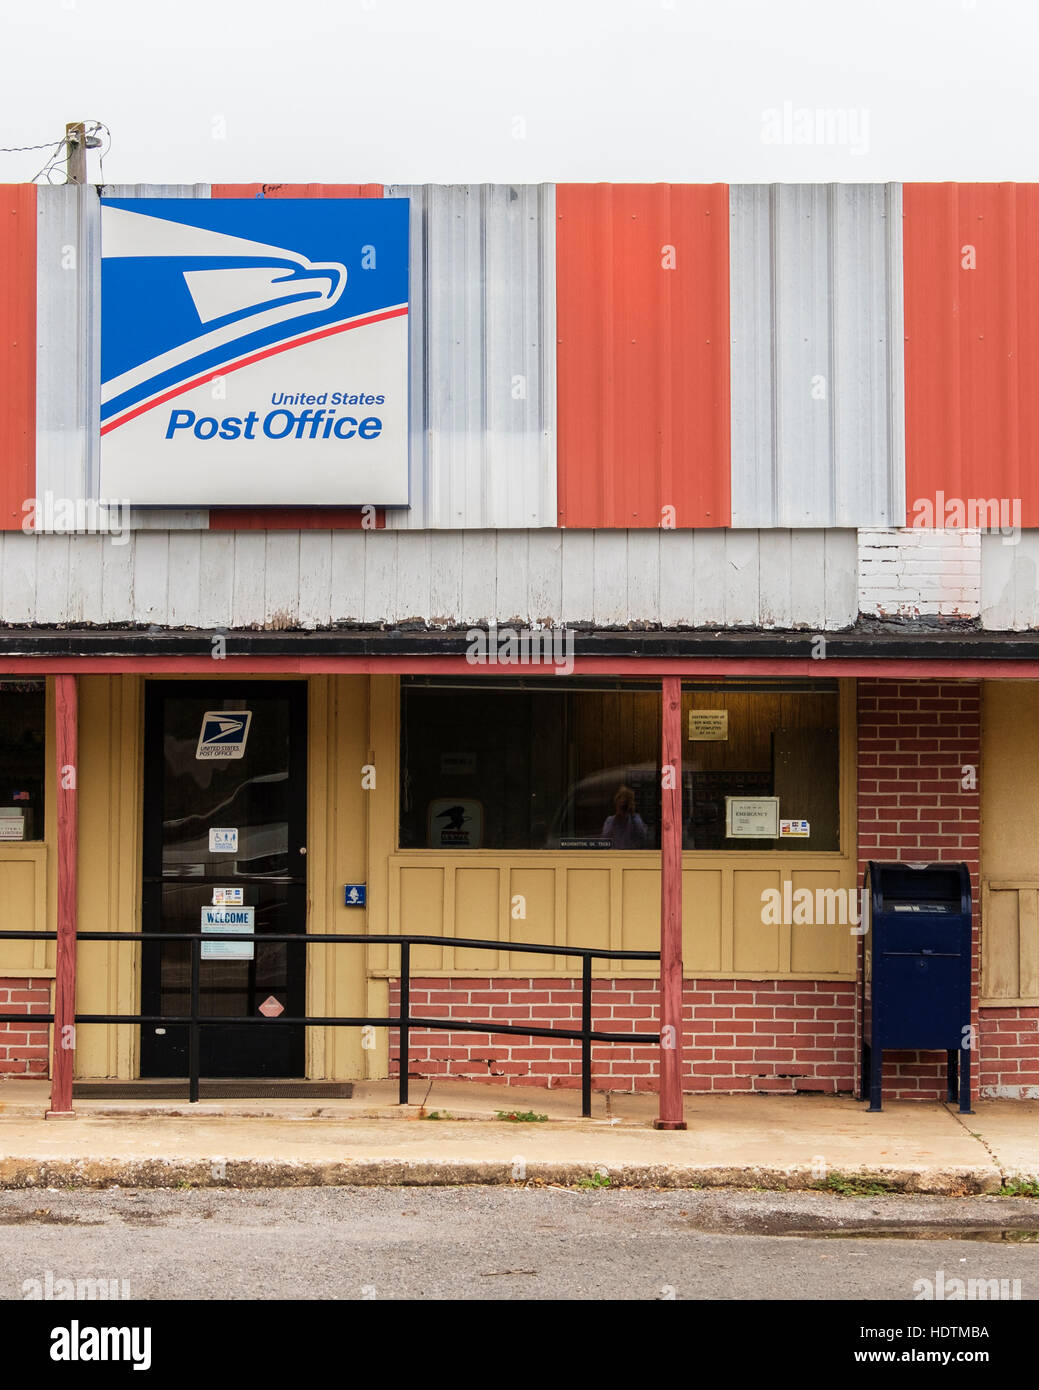 The front exterior of a small Post Office in the tiny rural town of Washington, Oklahoma, USA. Stock Photo